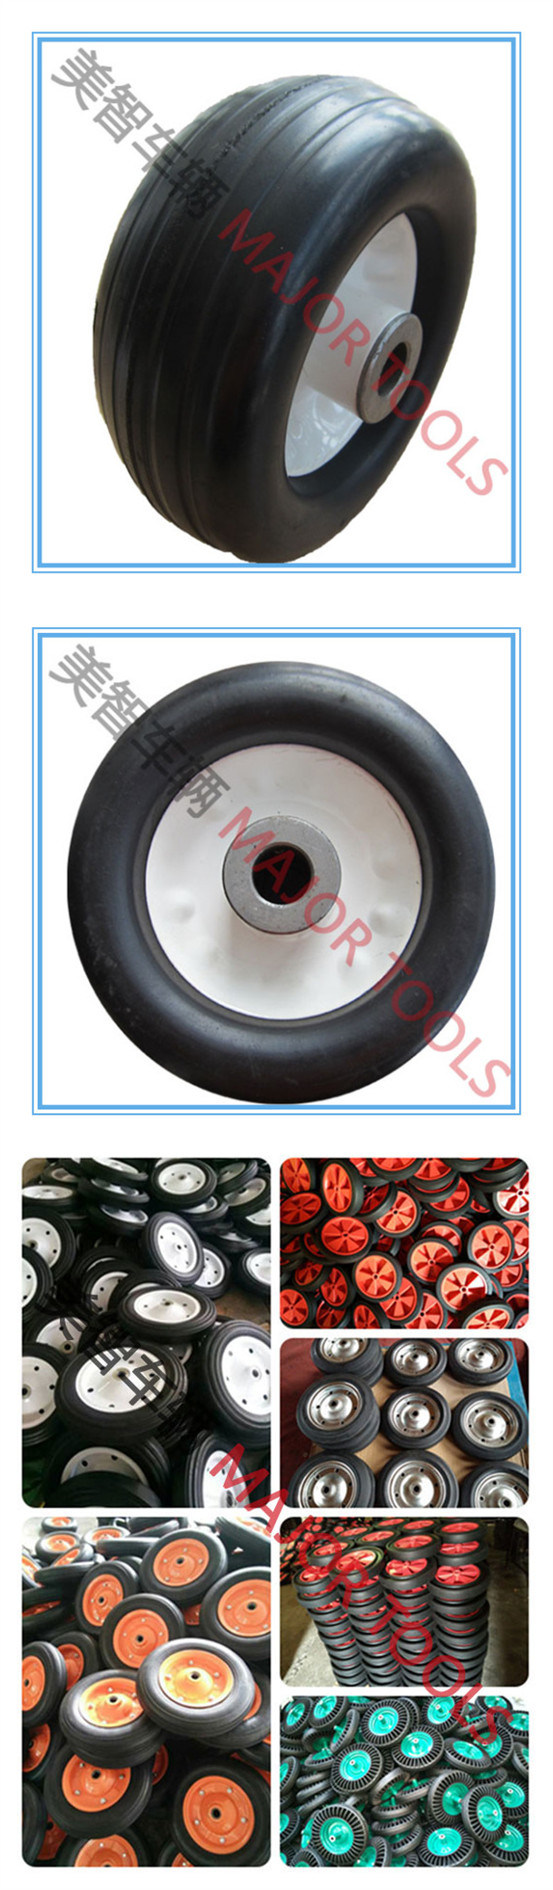 6X3 Solid Wheel Rubber Tyre for Toys